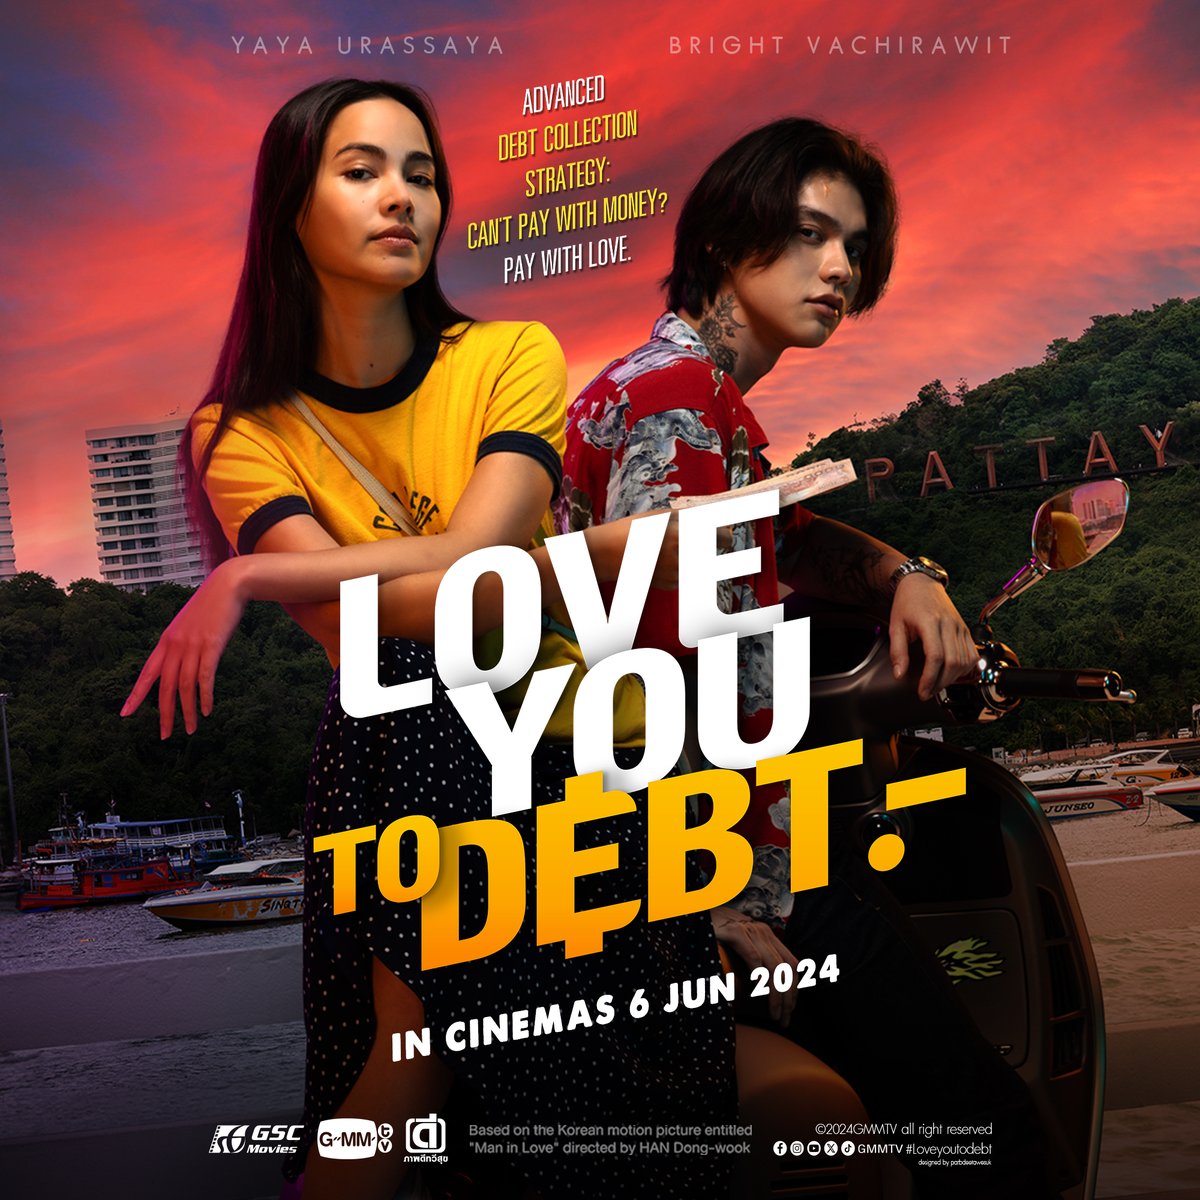 A weary debt collector’s last job leads to unexpected romance. Can love break the cycle of conflict and chaos?❤️ #LoveYouToDebt in GSC this 6th June 🎬✨

#เธอฟอร์แคช #LoveYouToDebt #bbrightvc #urassayas #GSCMovies